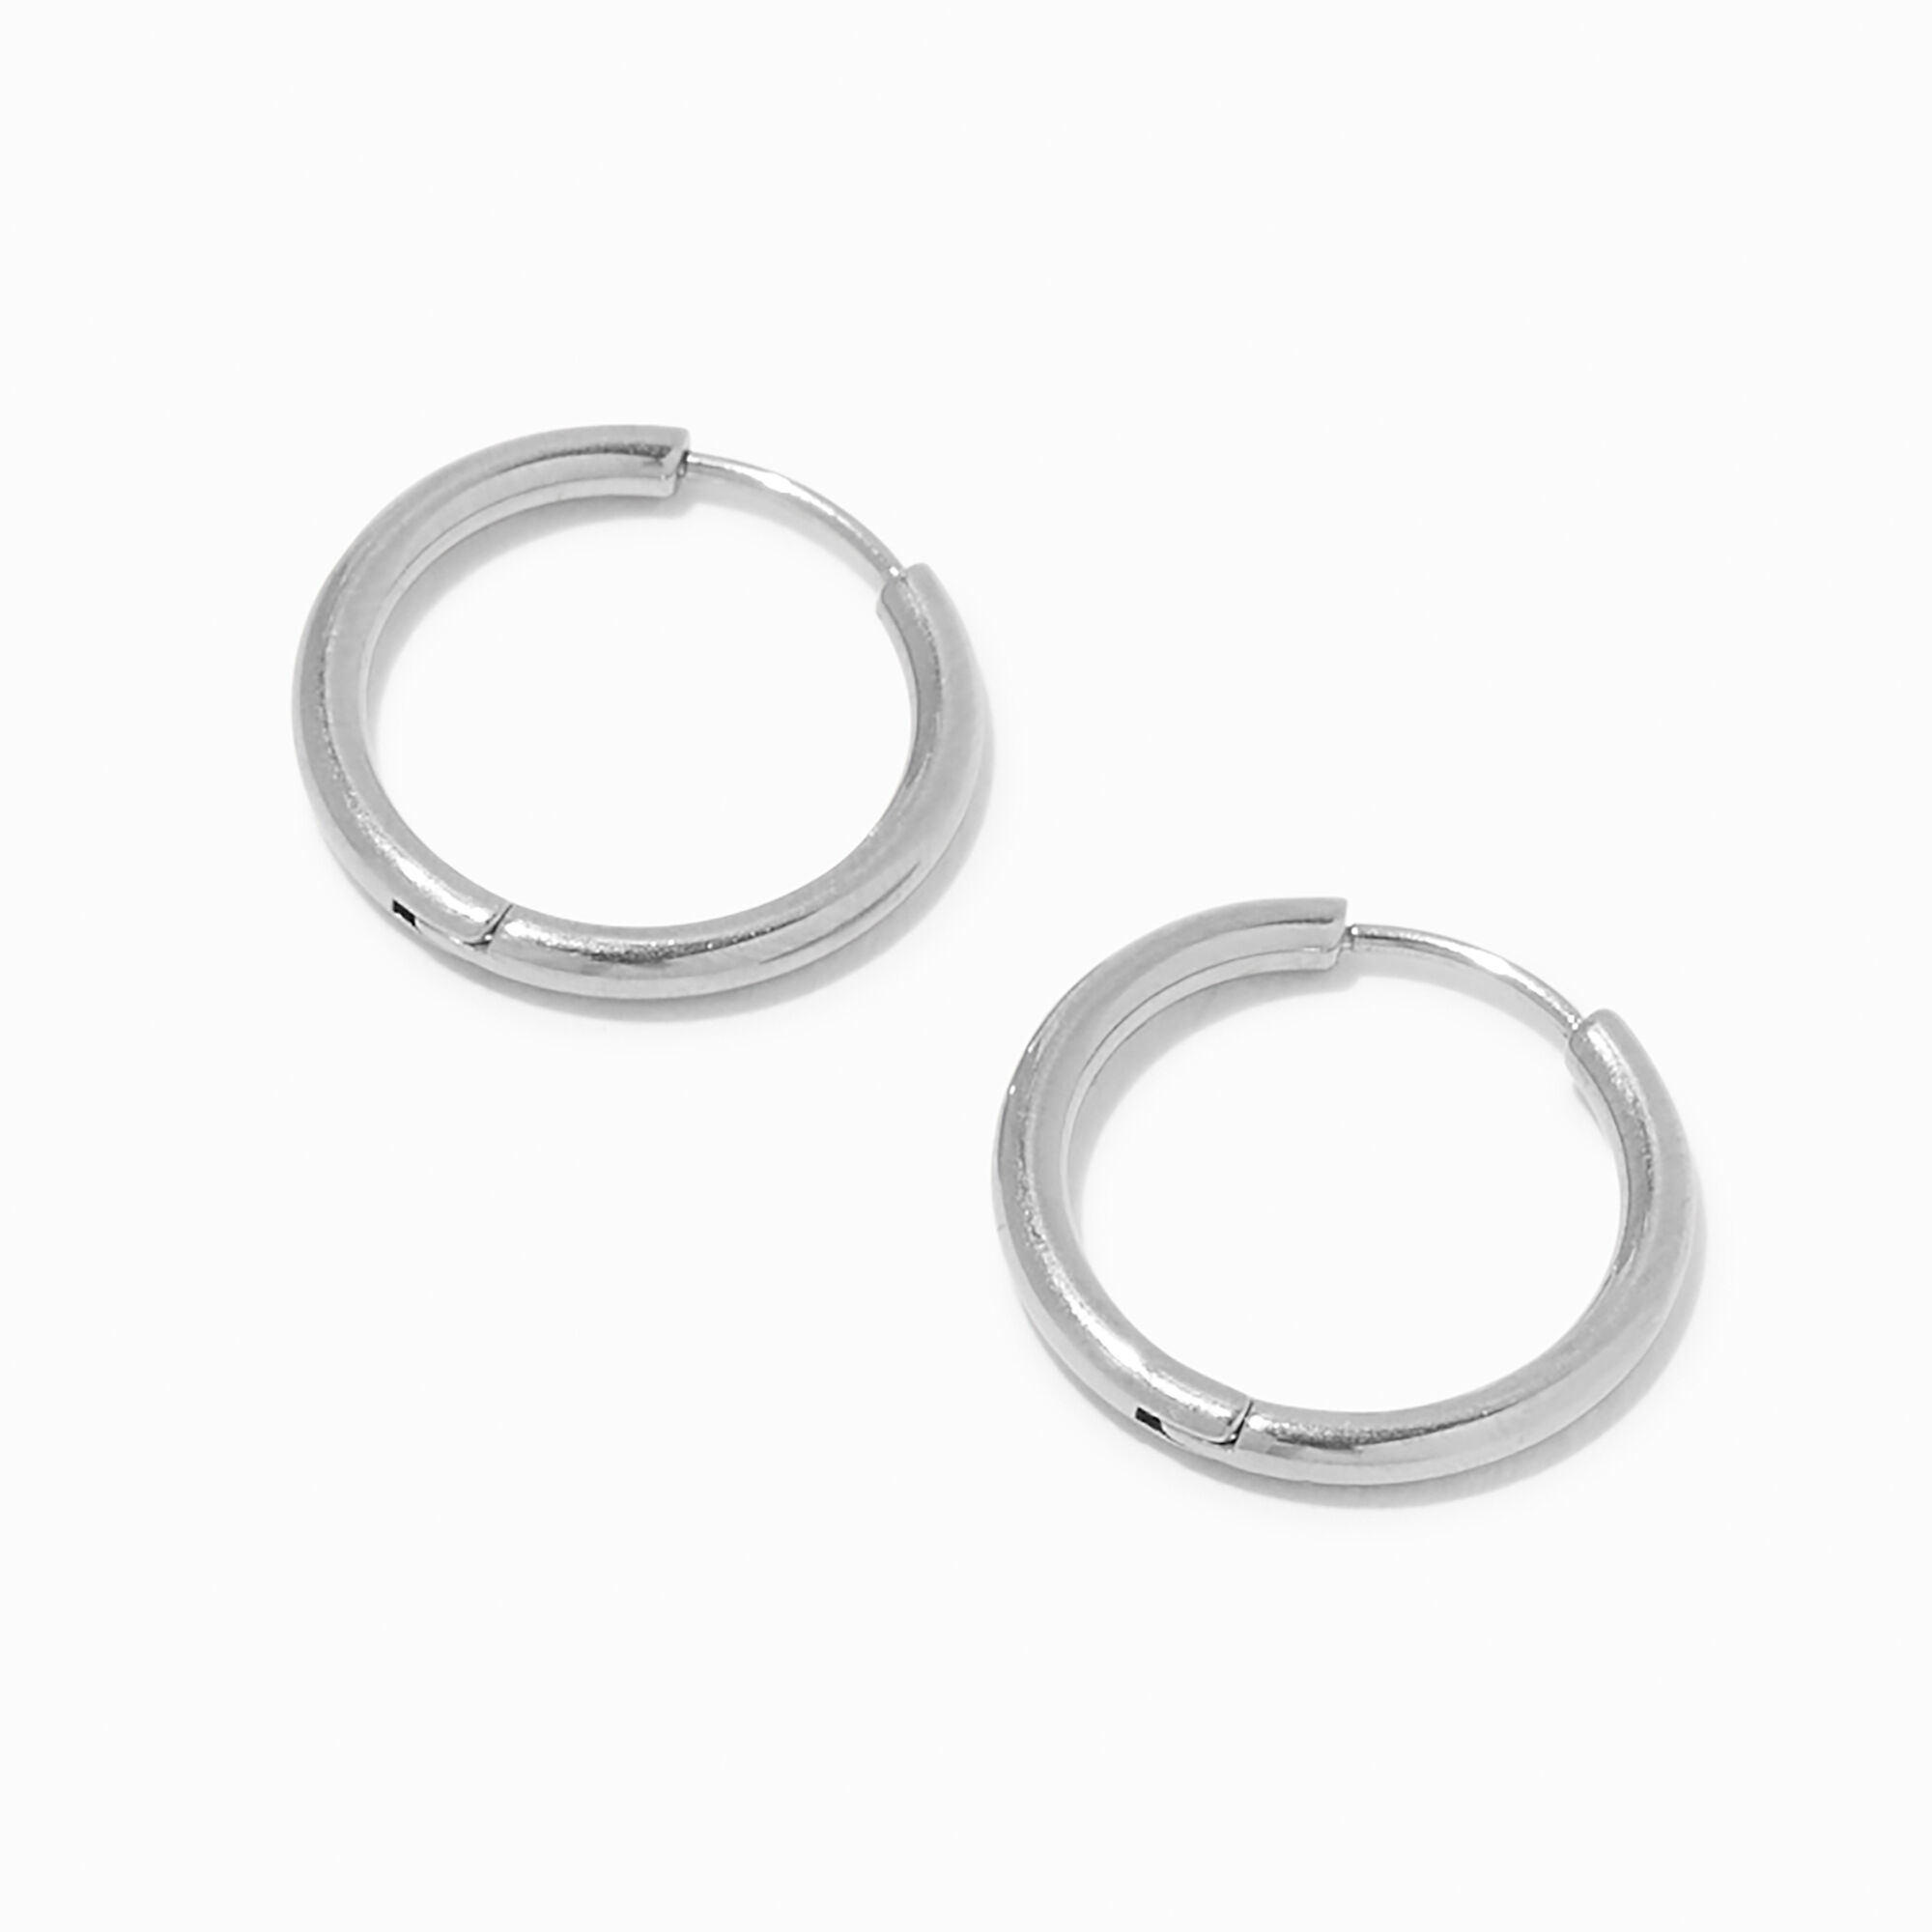 View C Luxe By Claires Titanium 14MM Tube Hoop Earrings Silver information